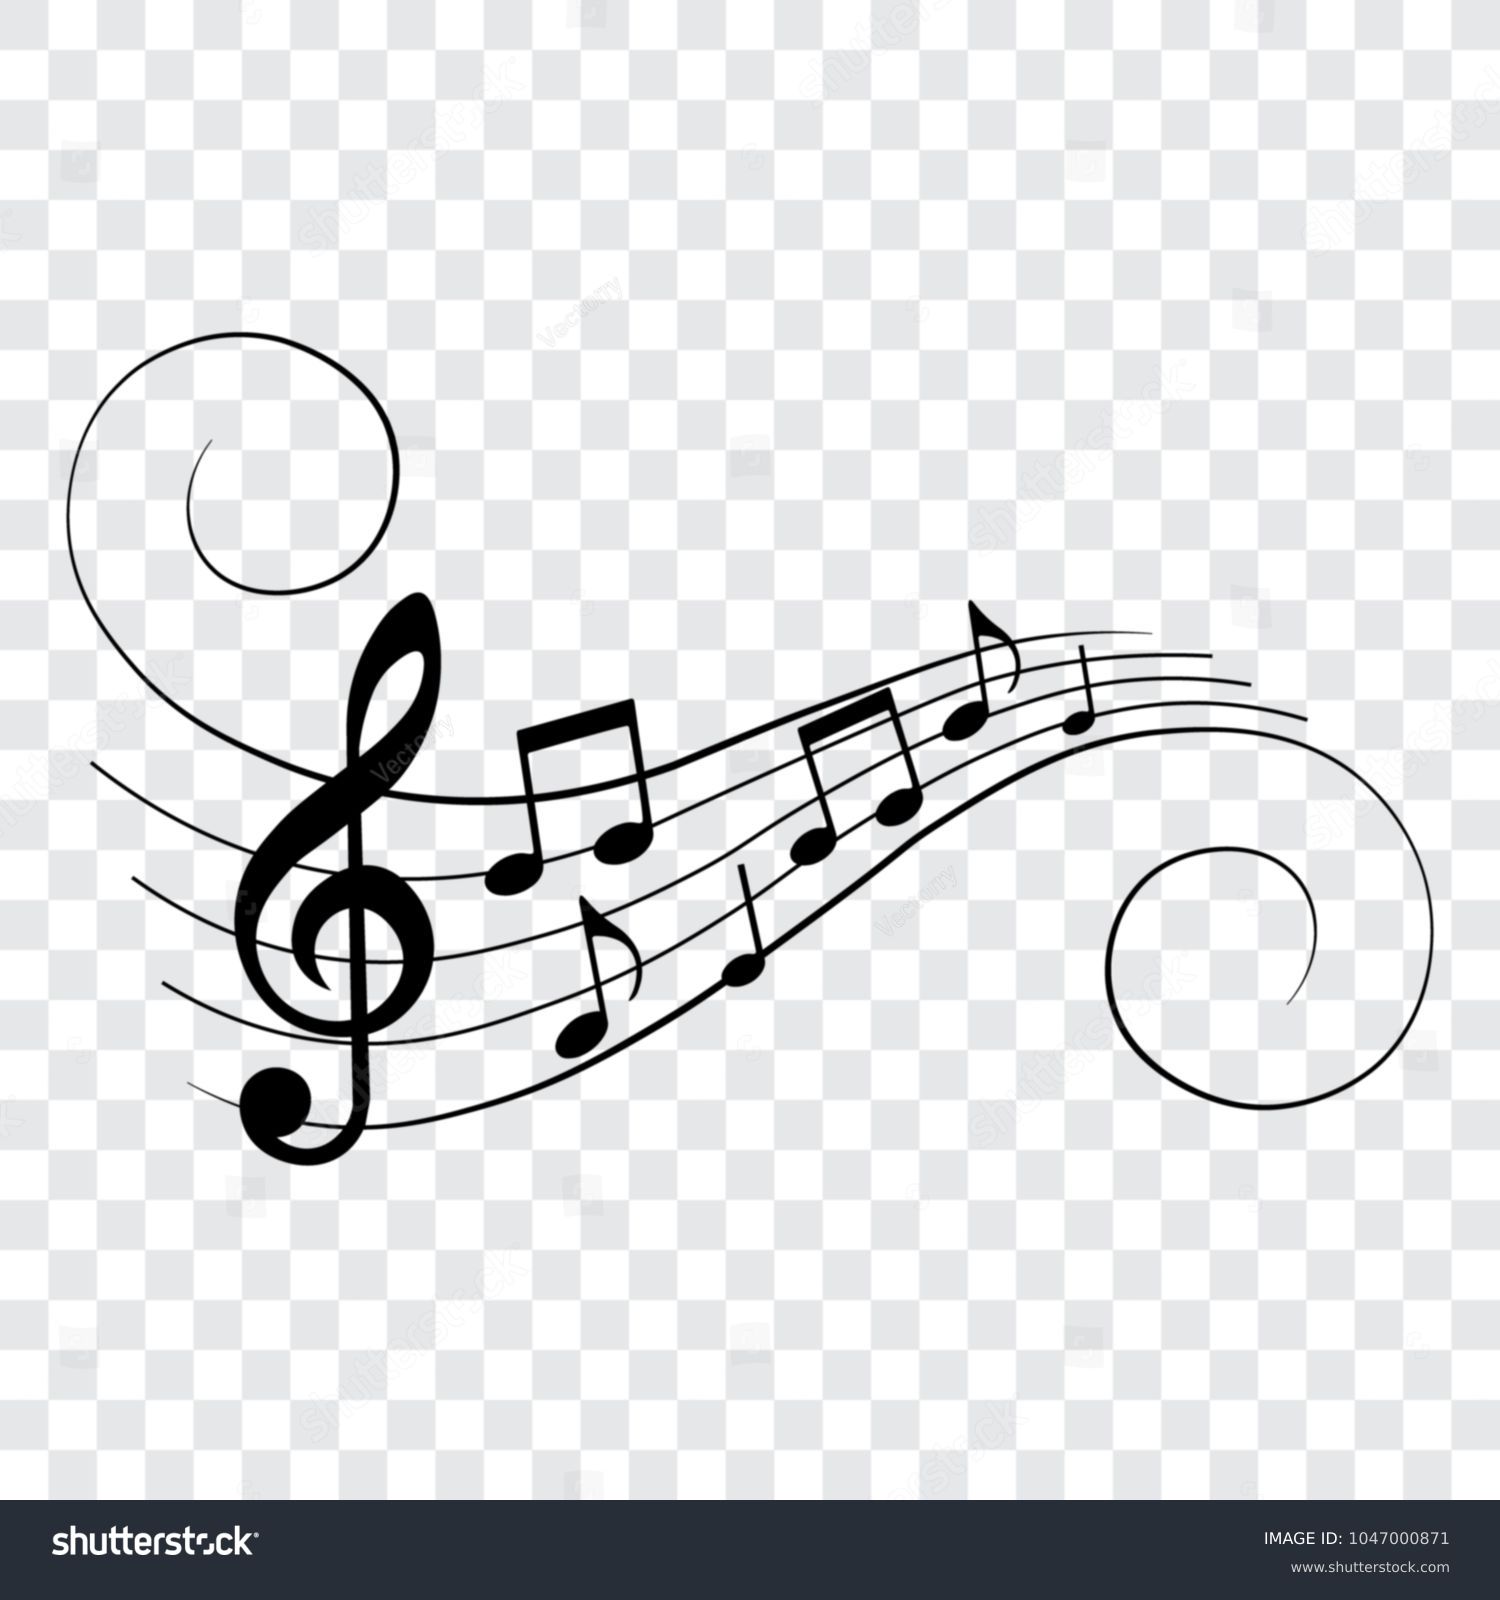 Music notes, musical design element, isolated, vector illustration. #1047000871